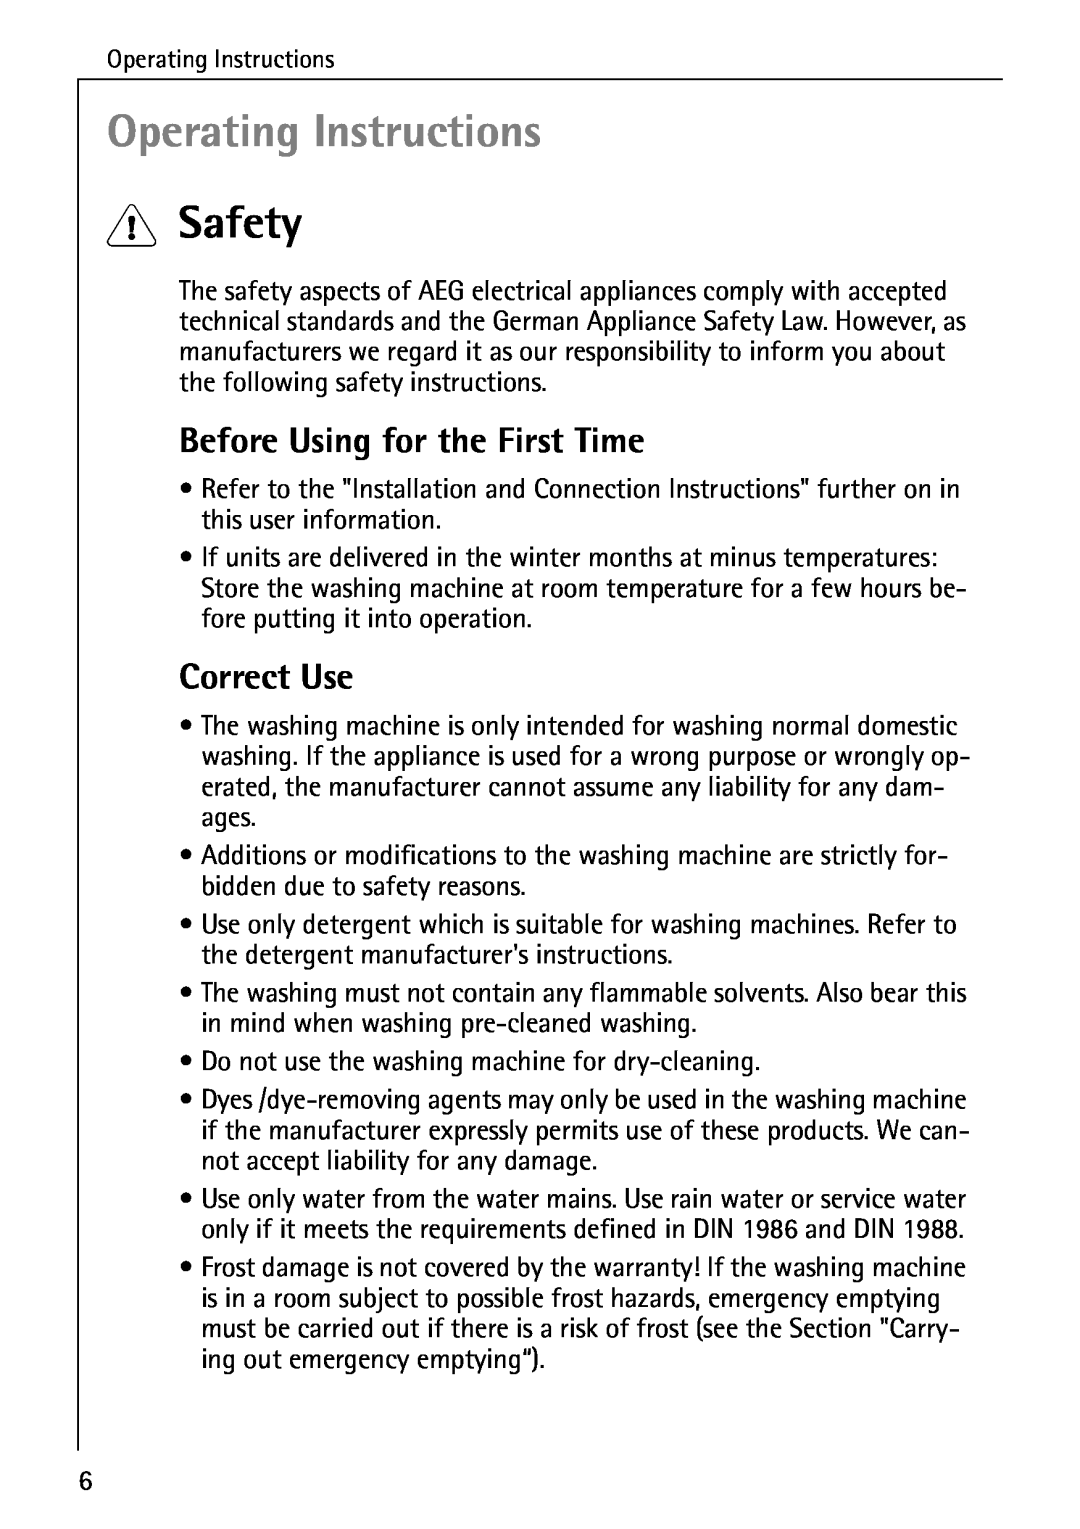 AEG 72640 manual Operating Instructions, Safety, Before Using for the First Time, Correct Use 